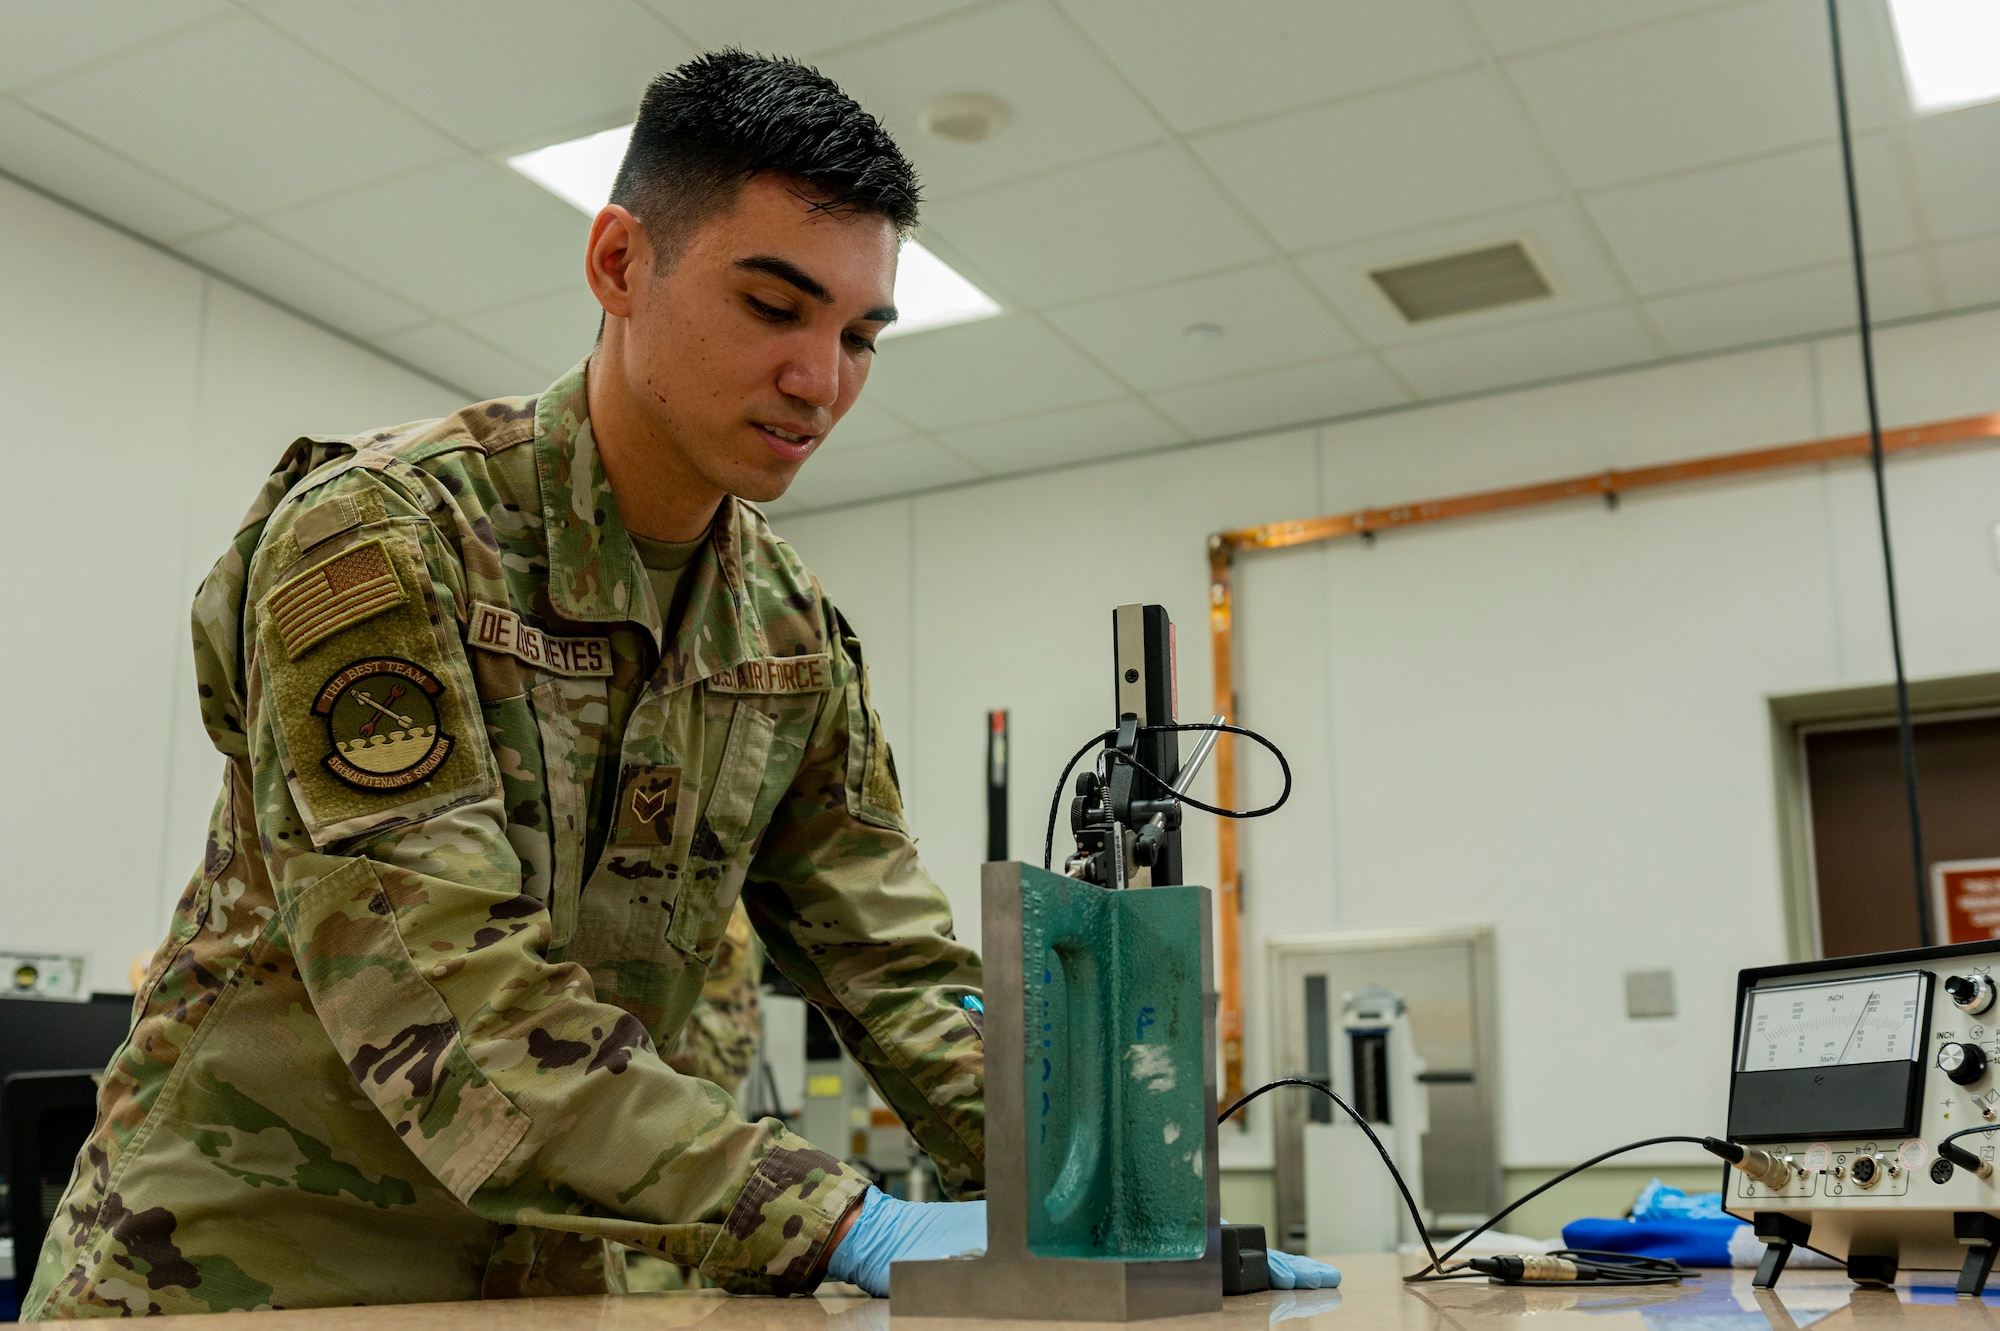 U.S. Air Force Senior Airman Bryant De Los Reyes, 51st Maintenance Squadron precision measurement equipment laboratory logistics technician, compares the parallelism of an angle iron at Osan Air Base, Republic of Korea, Dec. 15, 2023. The PMEL flight services more than 100 organizations at Osan and across the ROK. (U.S. Air Force photo by Senior Airman Kaitlin Castillo)